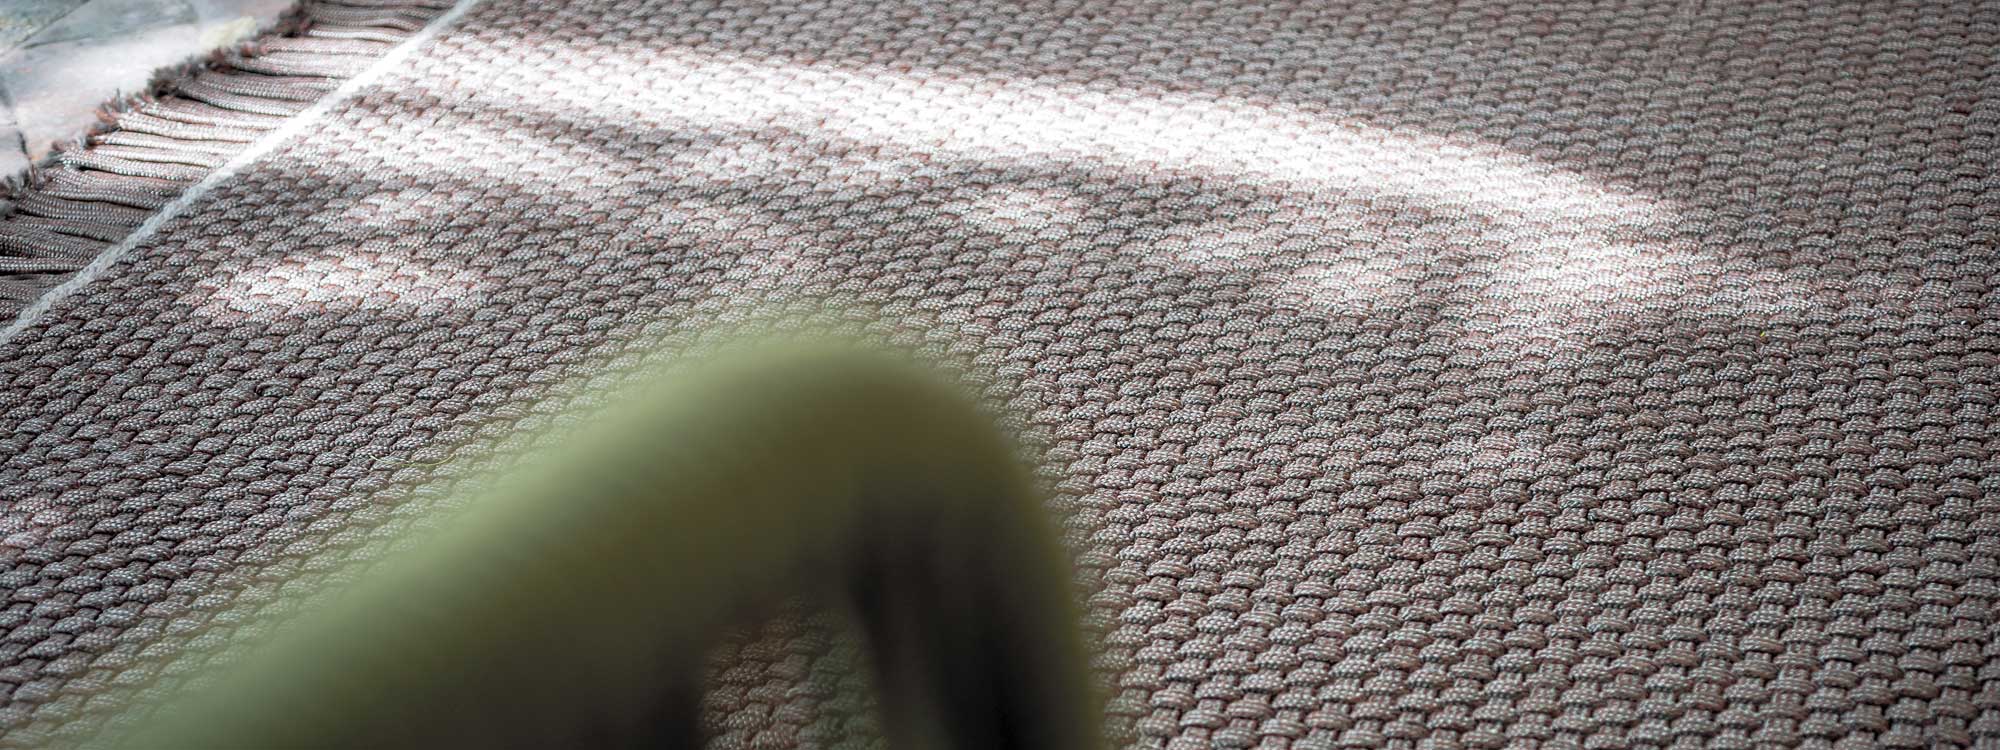 Image of detail of RODA Knot luxury outdoor carpet, with tubular arm of Harp garden chair in foreground